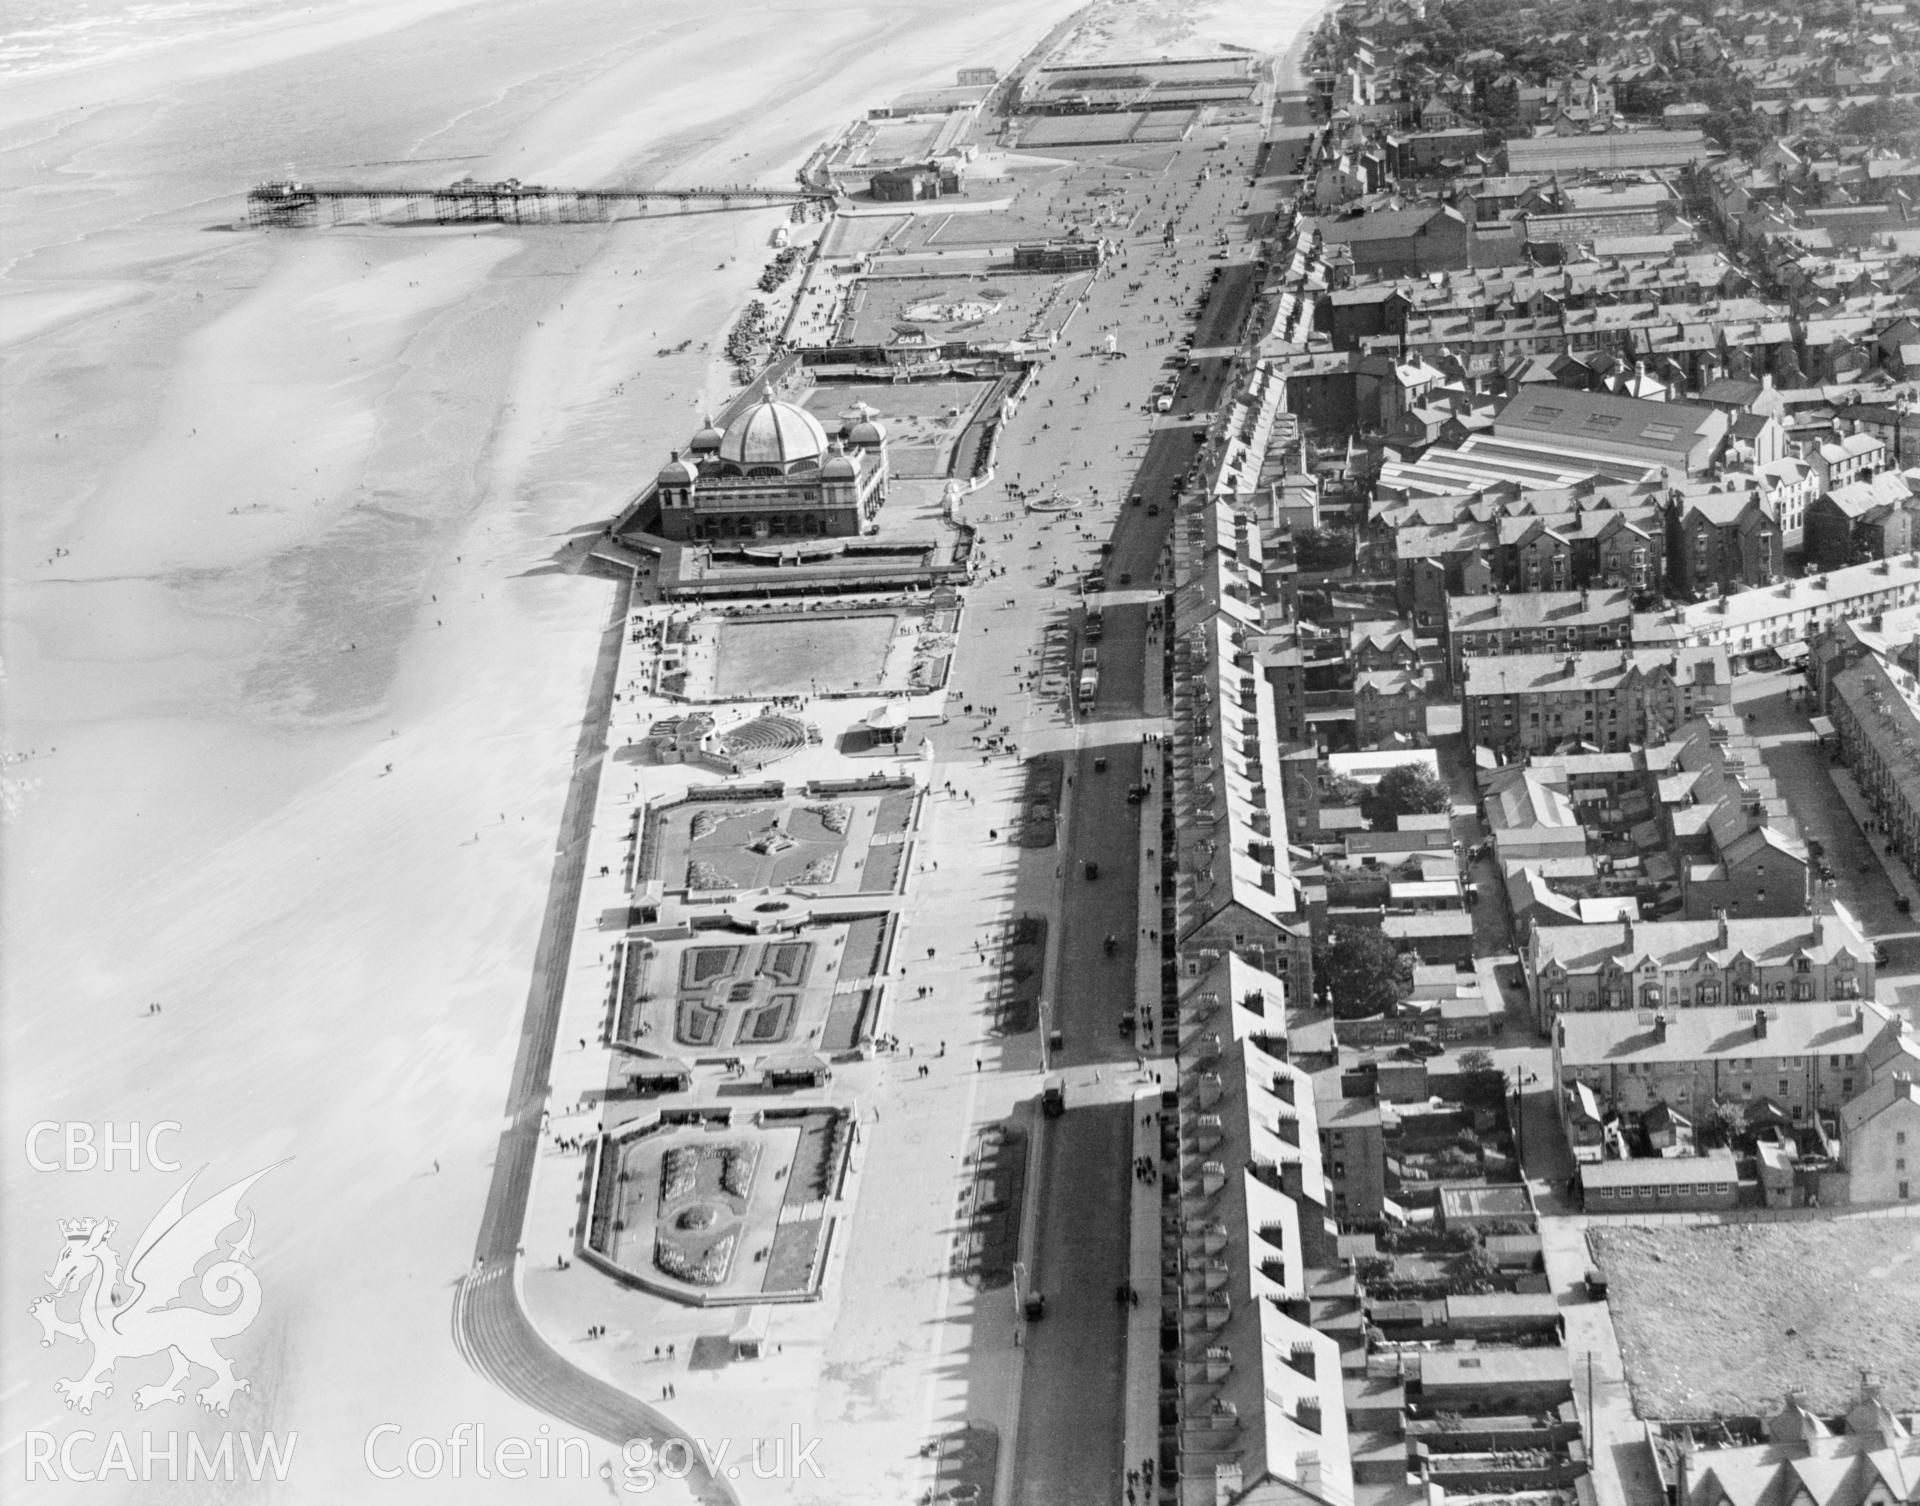 View of Rhyl showing promenade, pier, bandstand, pleasure gardens and open air swimming pool, oblique aerial view. 5?x4? black and white glass plate negative.